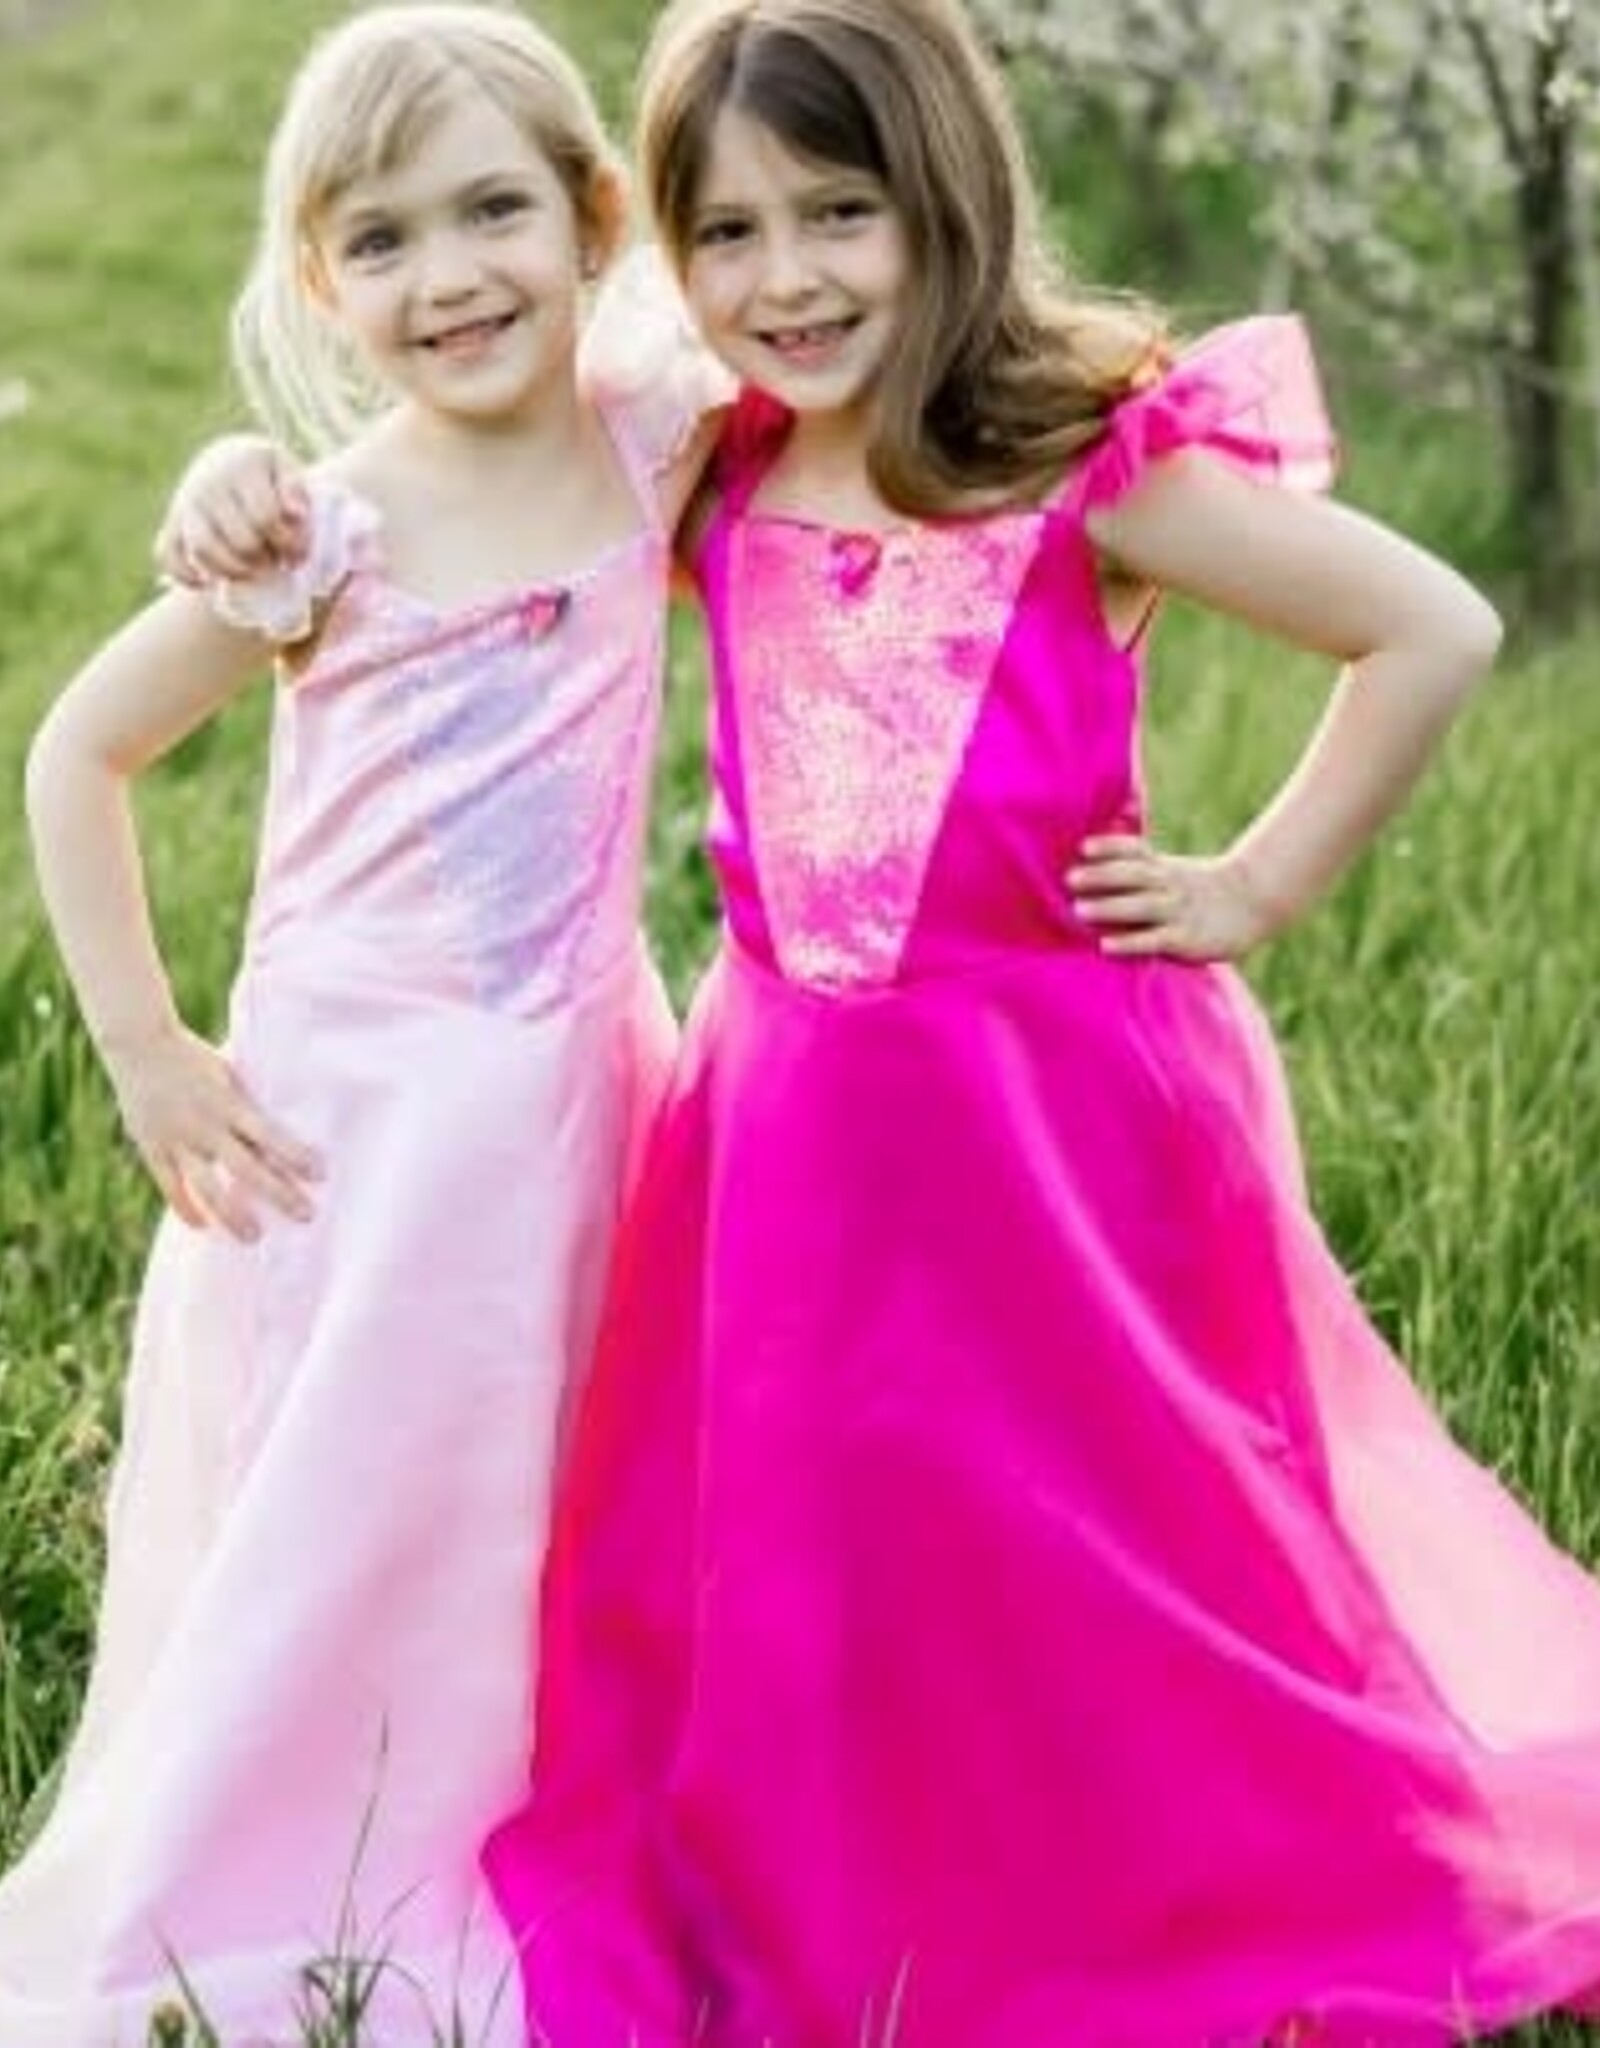 Great Pretenders Party Princess Dress, Hot Pink, Size 5-6